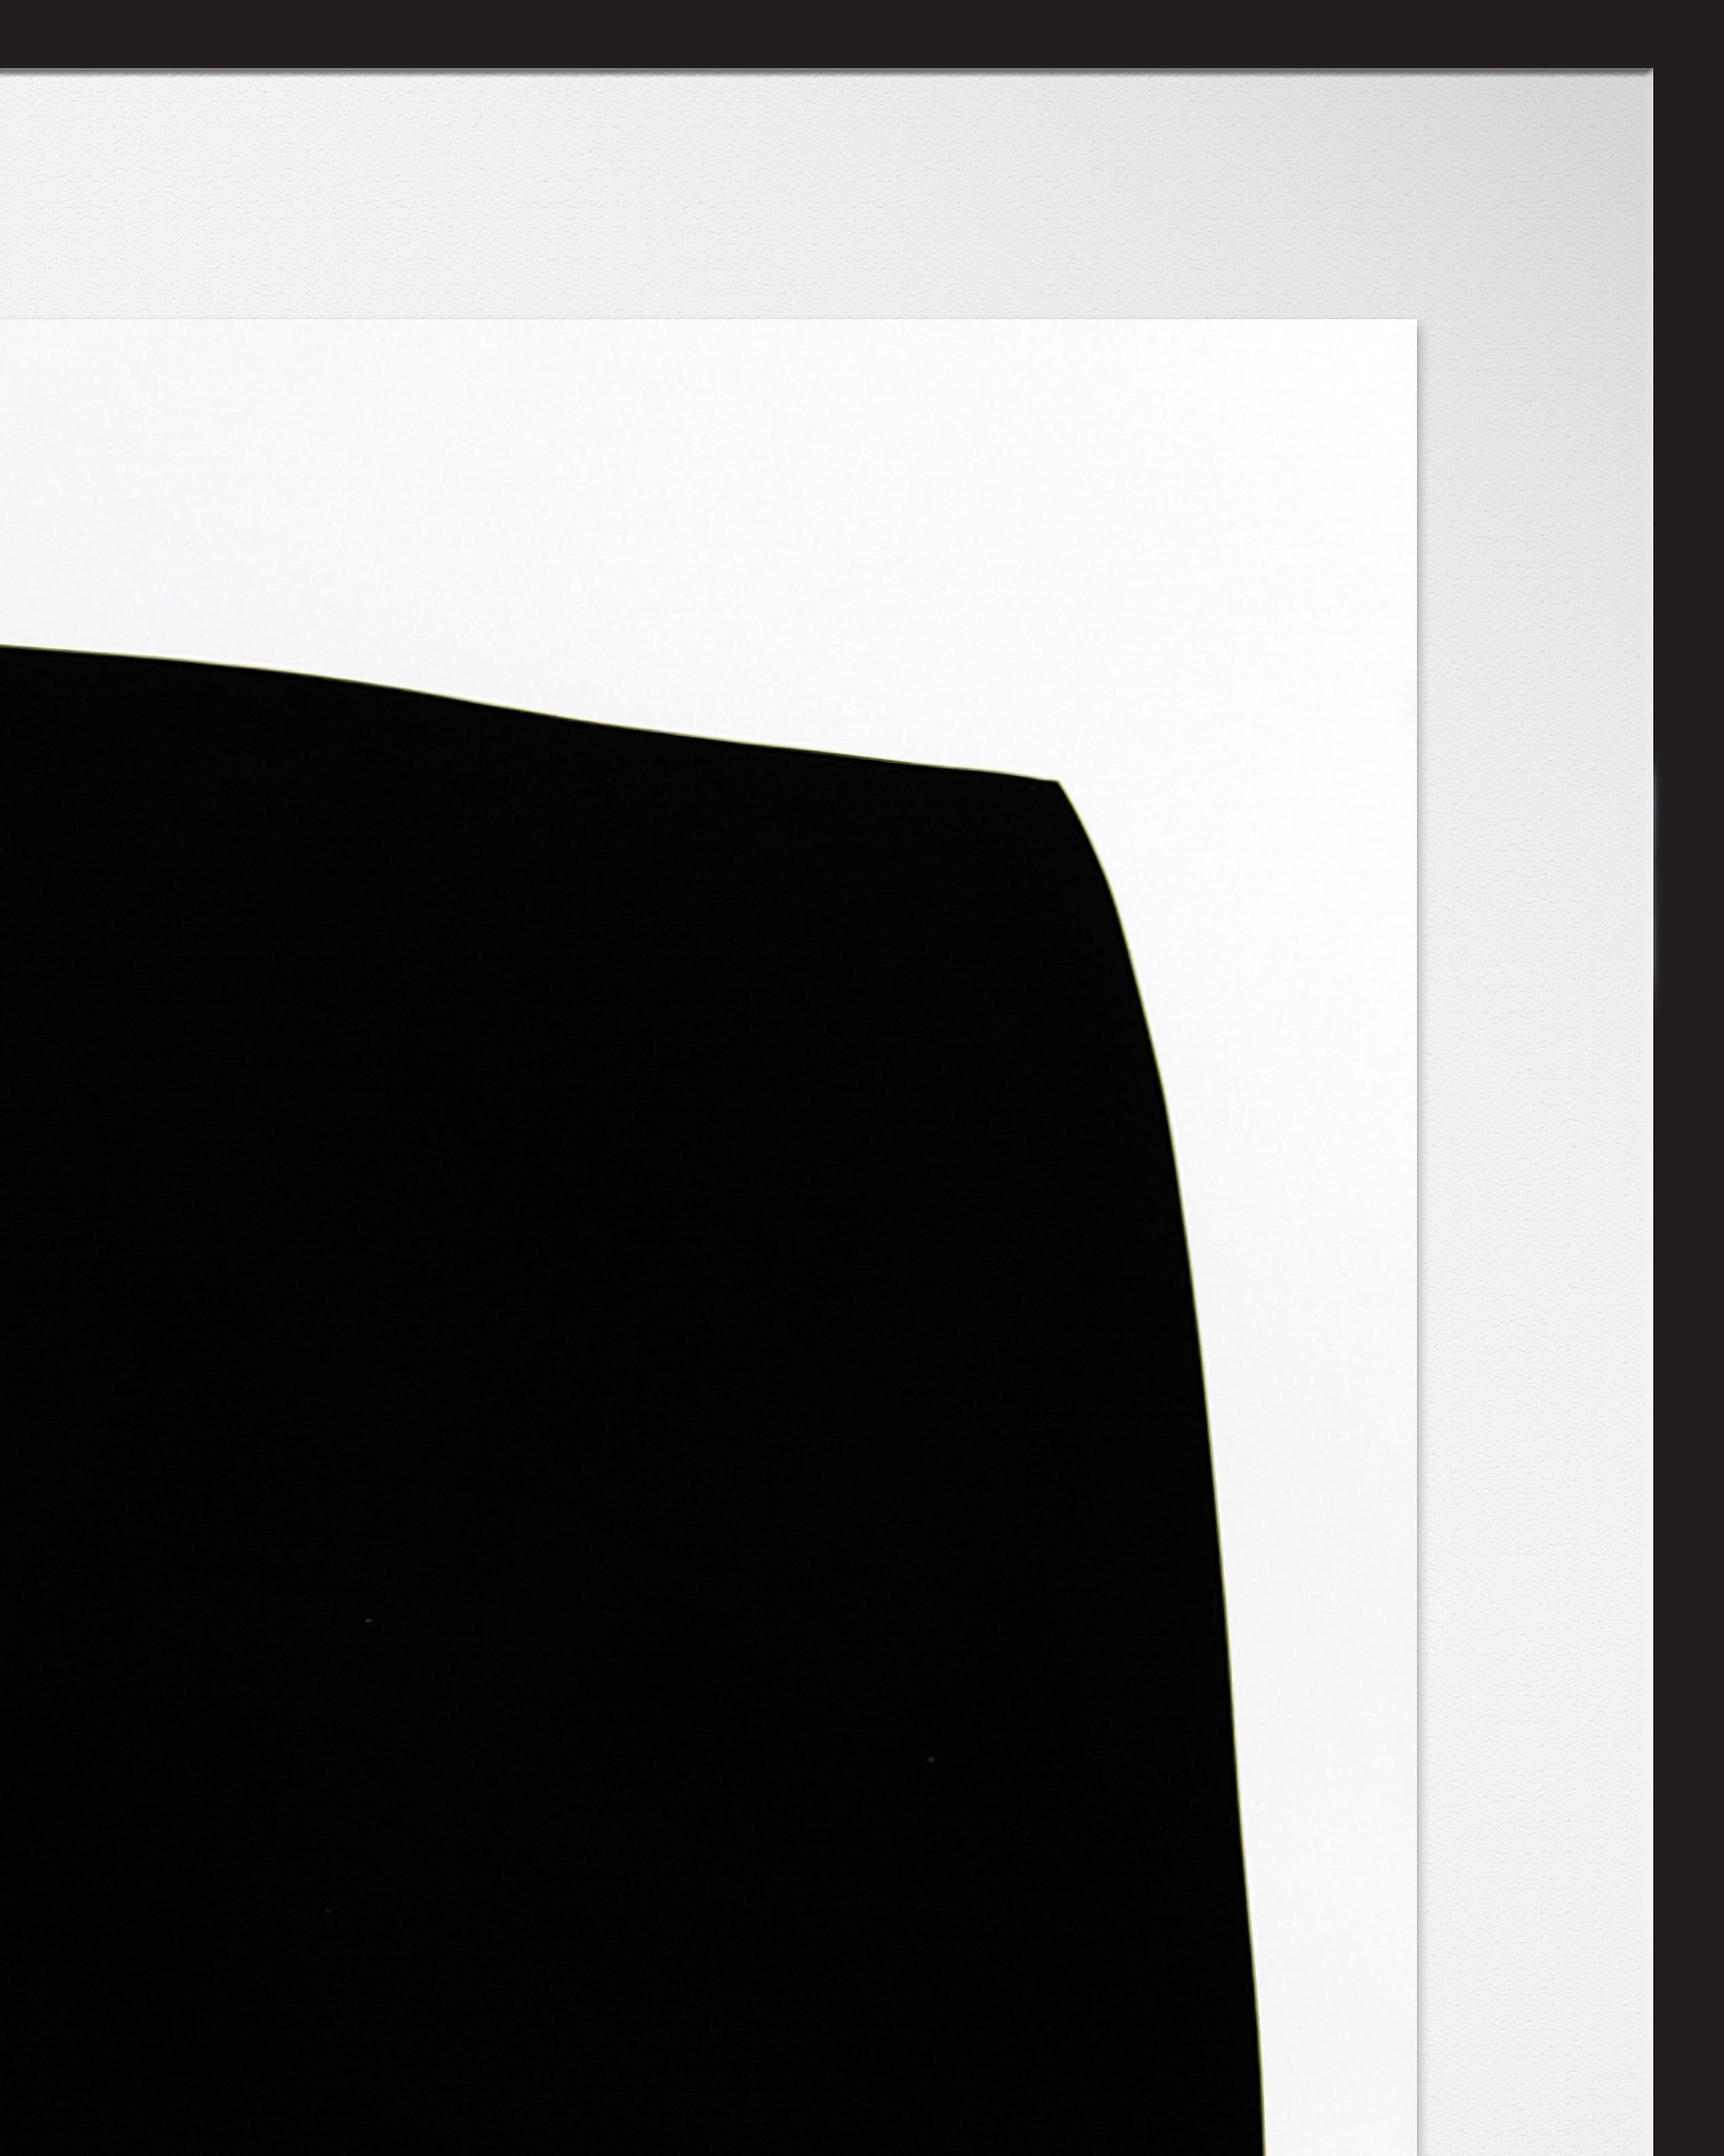 Single Black Shape - minimalist, contemporary, abstract, gesso on archival paper - Contemporary Painting by Aron Hill